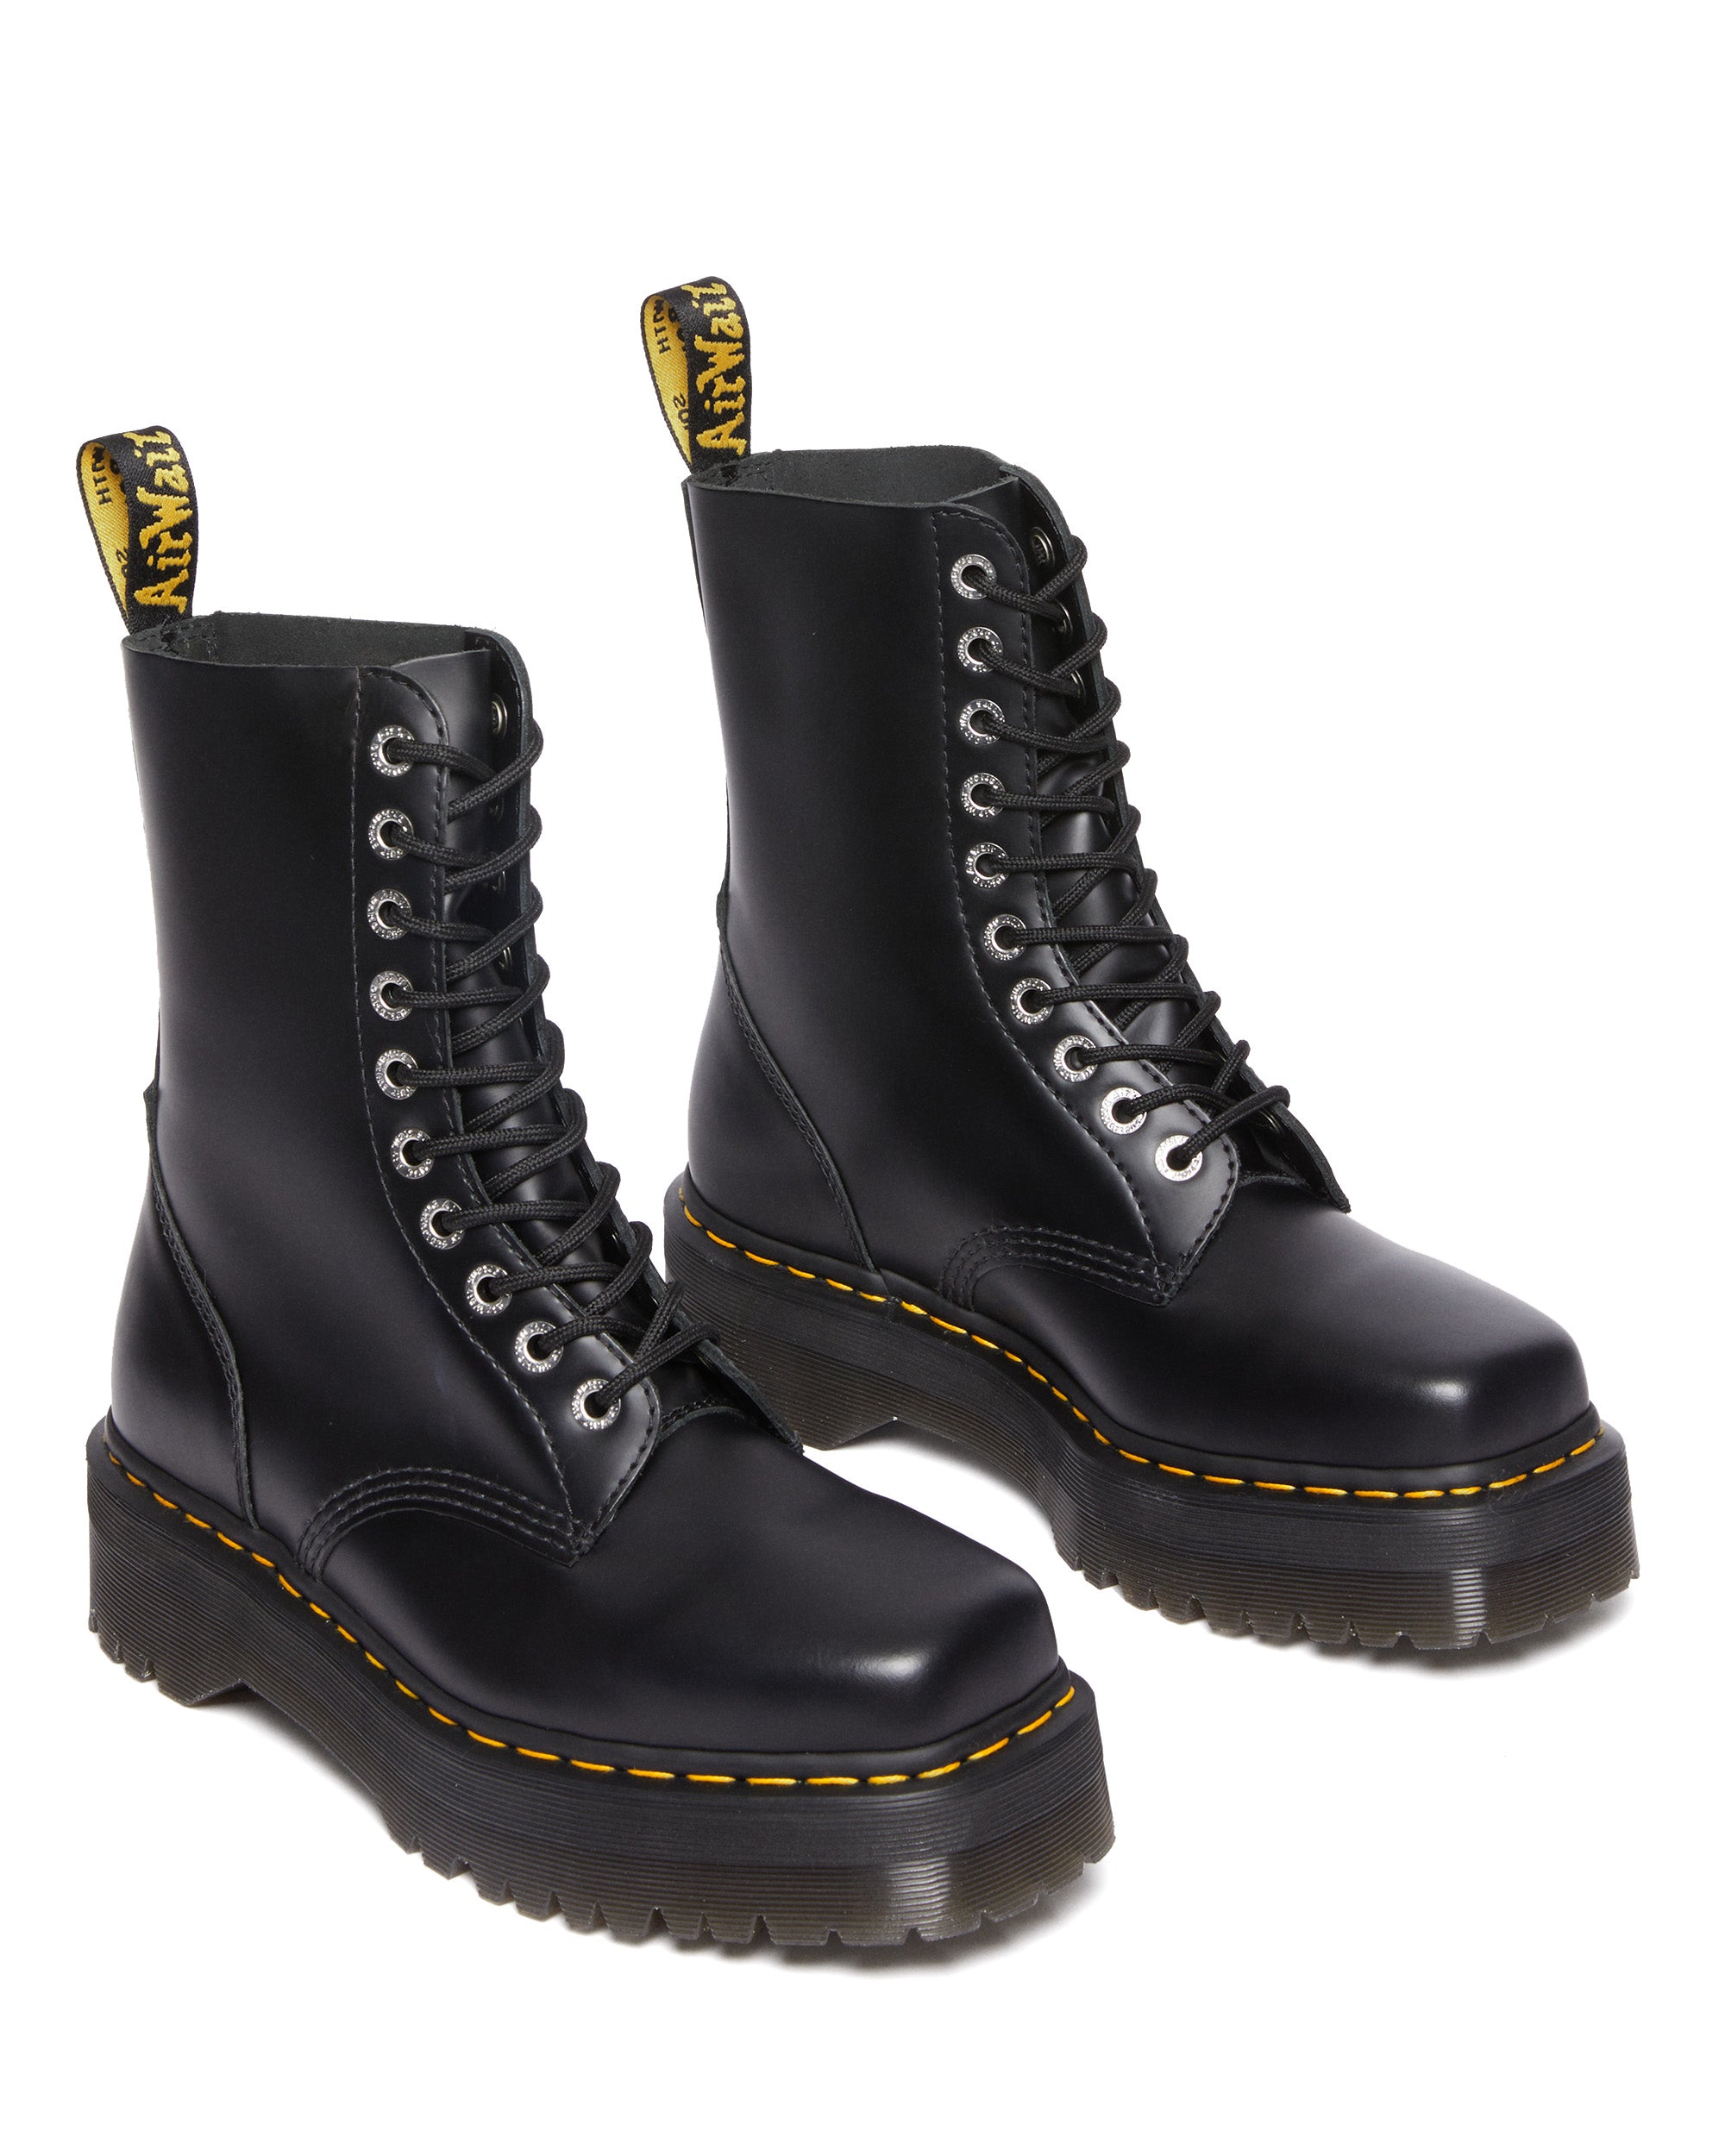 DR. MARTENS 1490 QUAD SQUARED POLISHED SMOOTH LACE UP BOOT BLACK